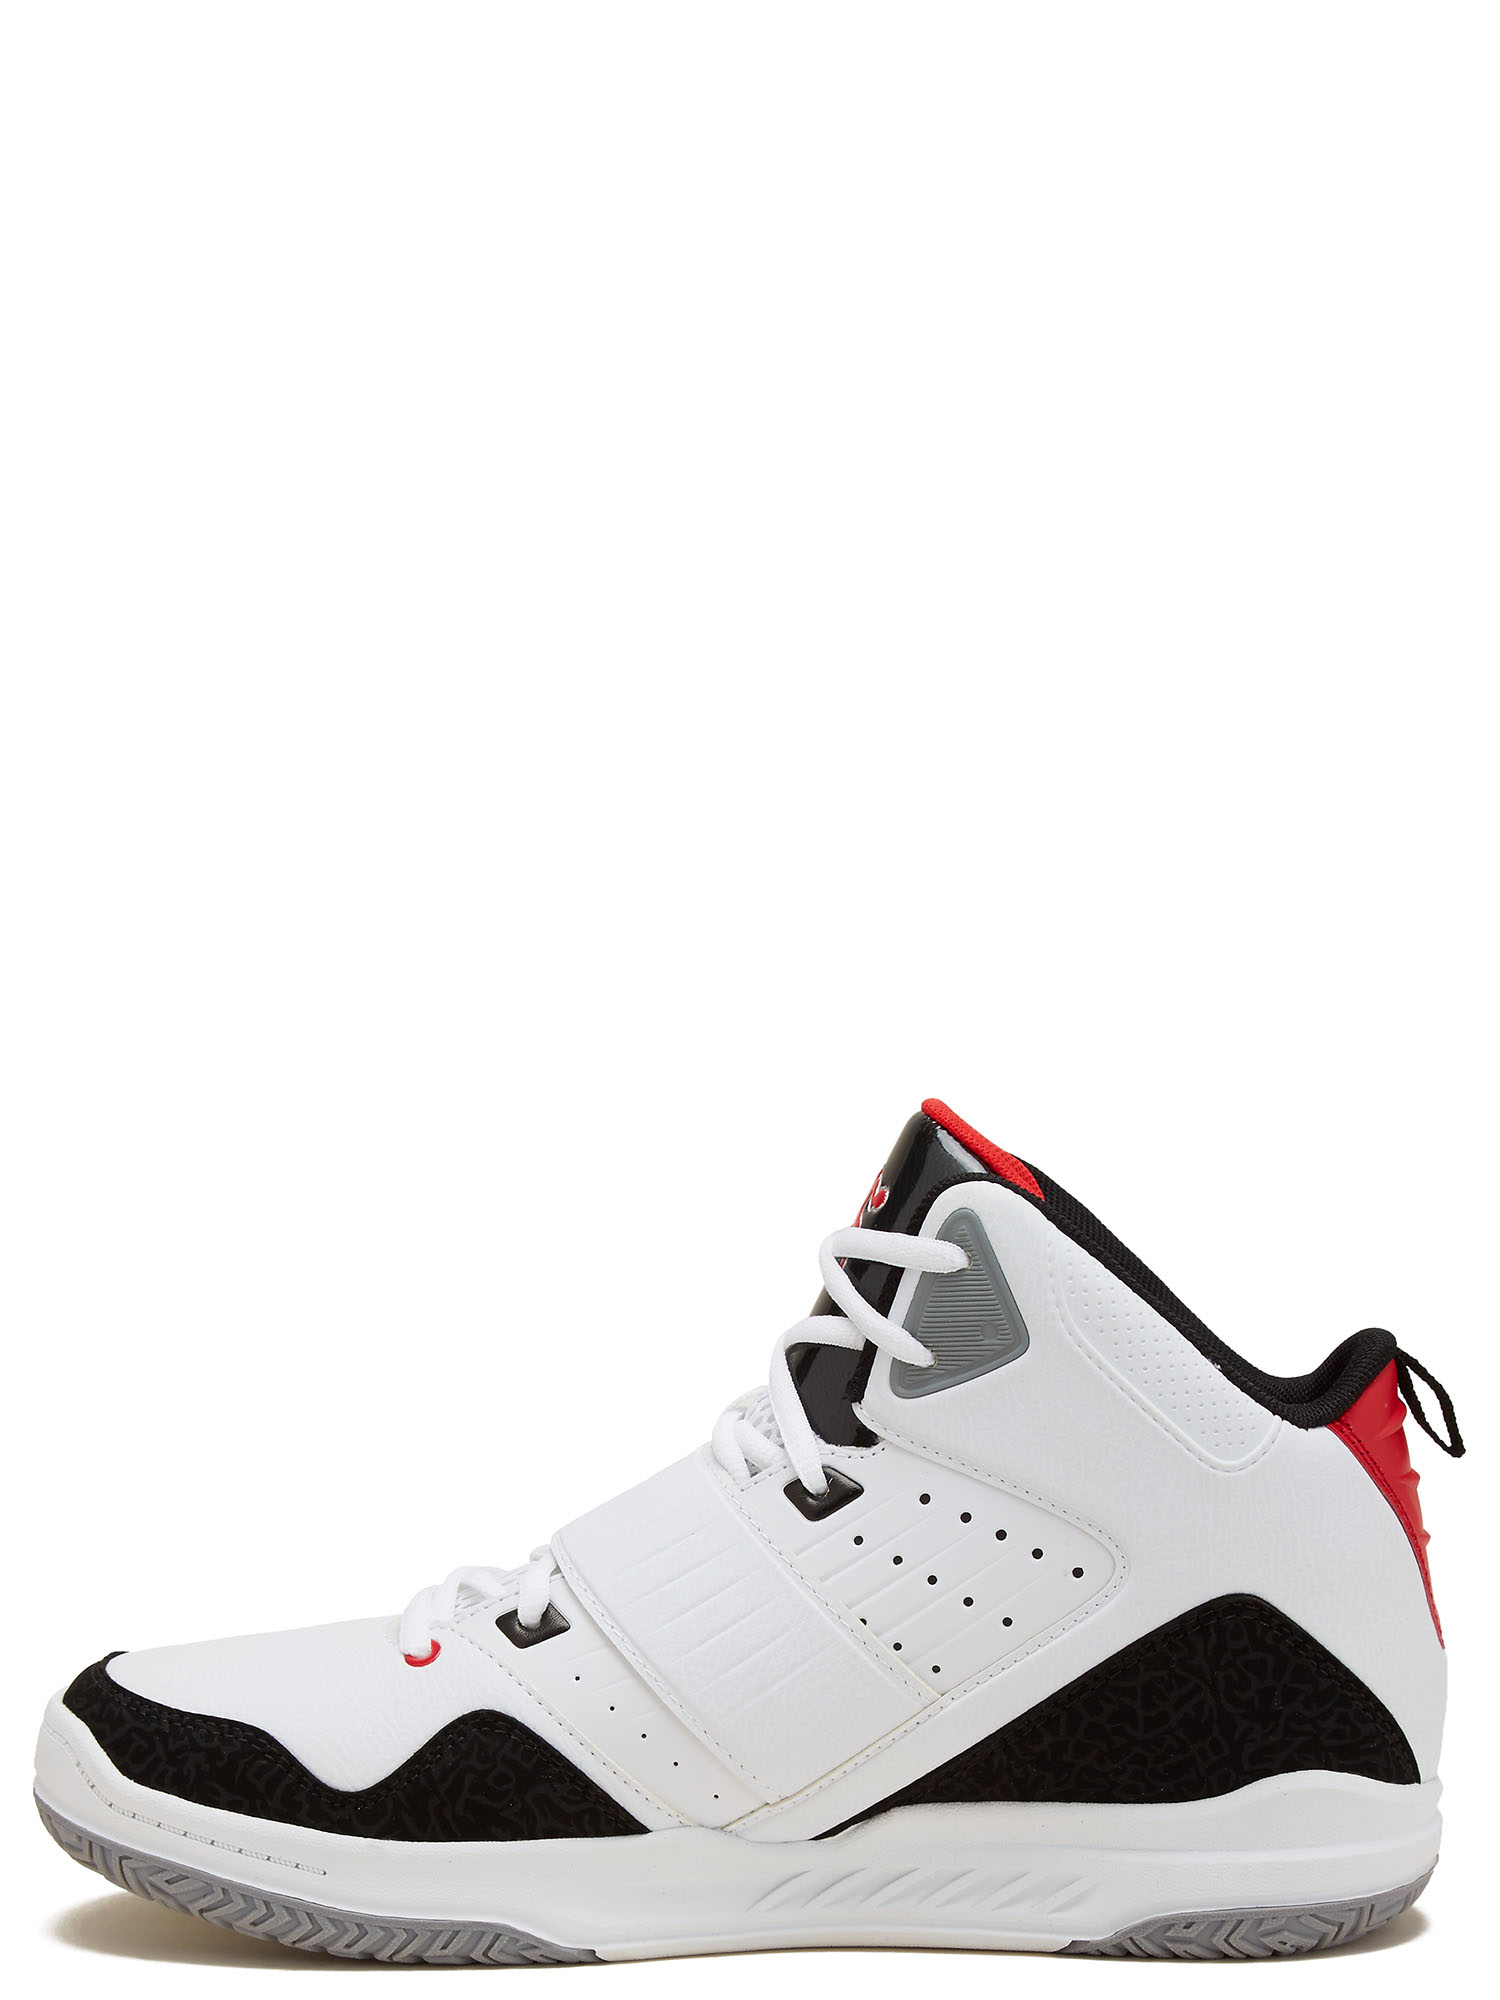 And1 Men's Capital 3.0 Basketball Shoe with Strap - image 4 of 6